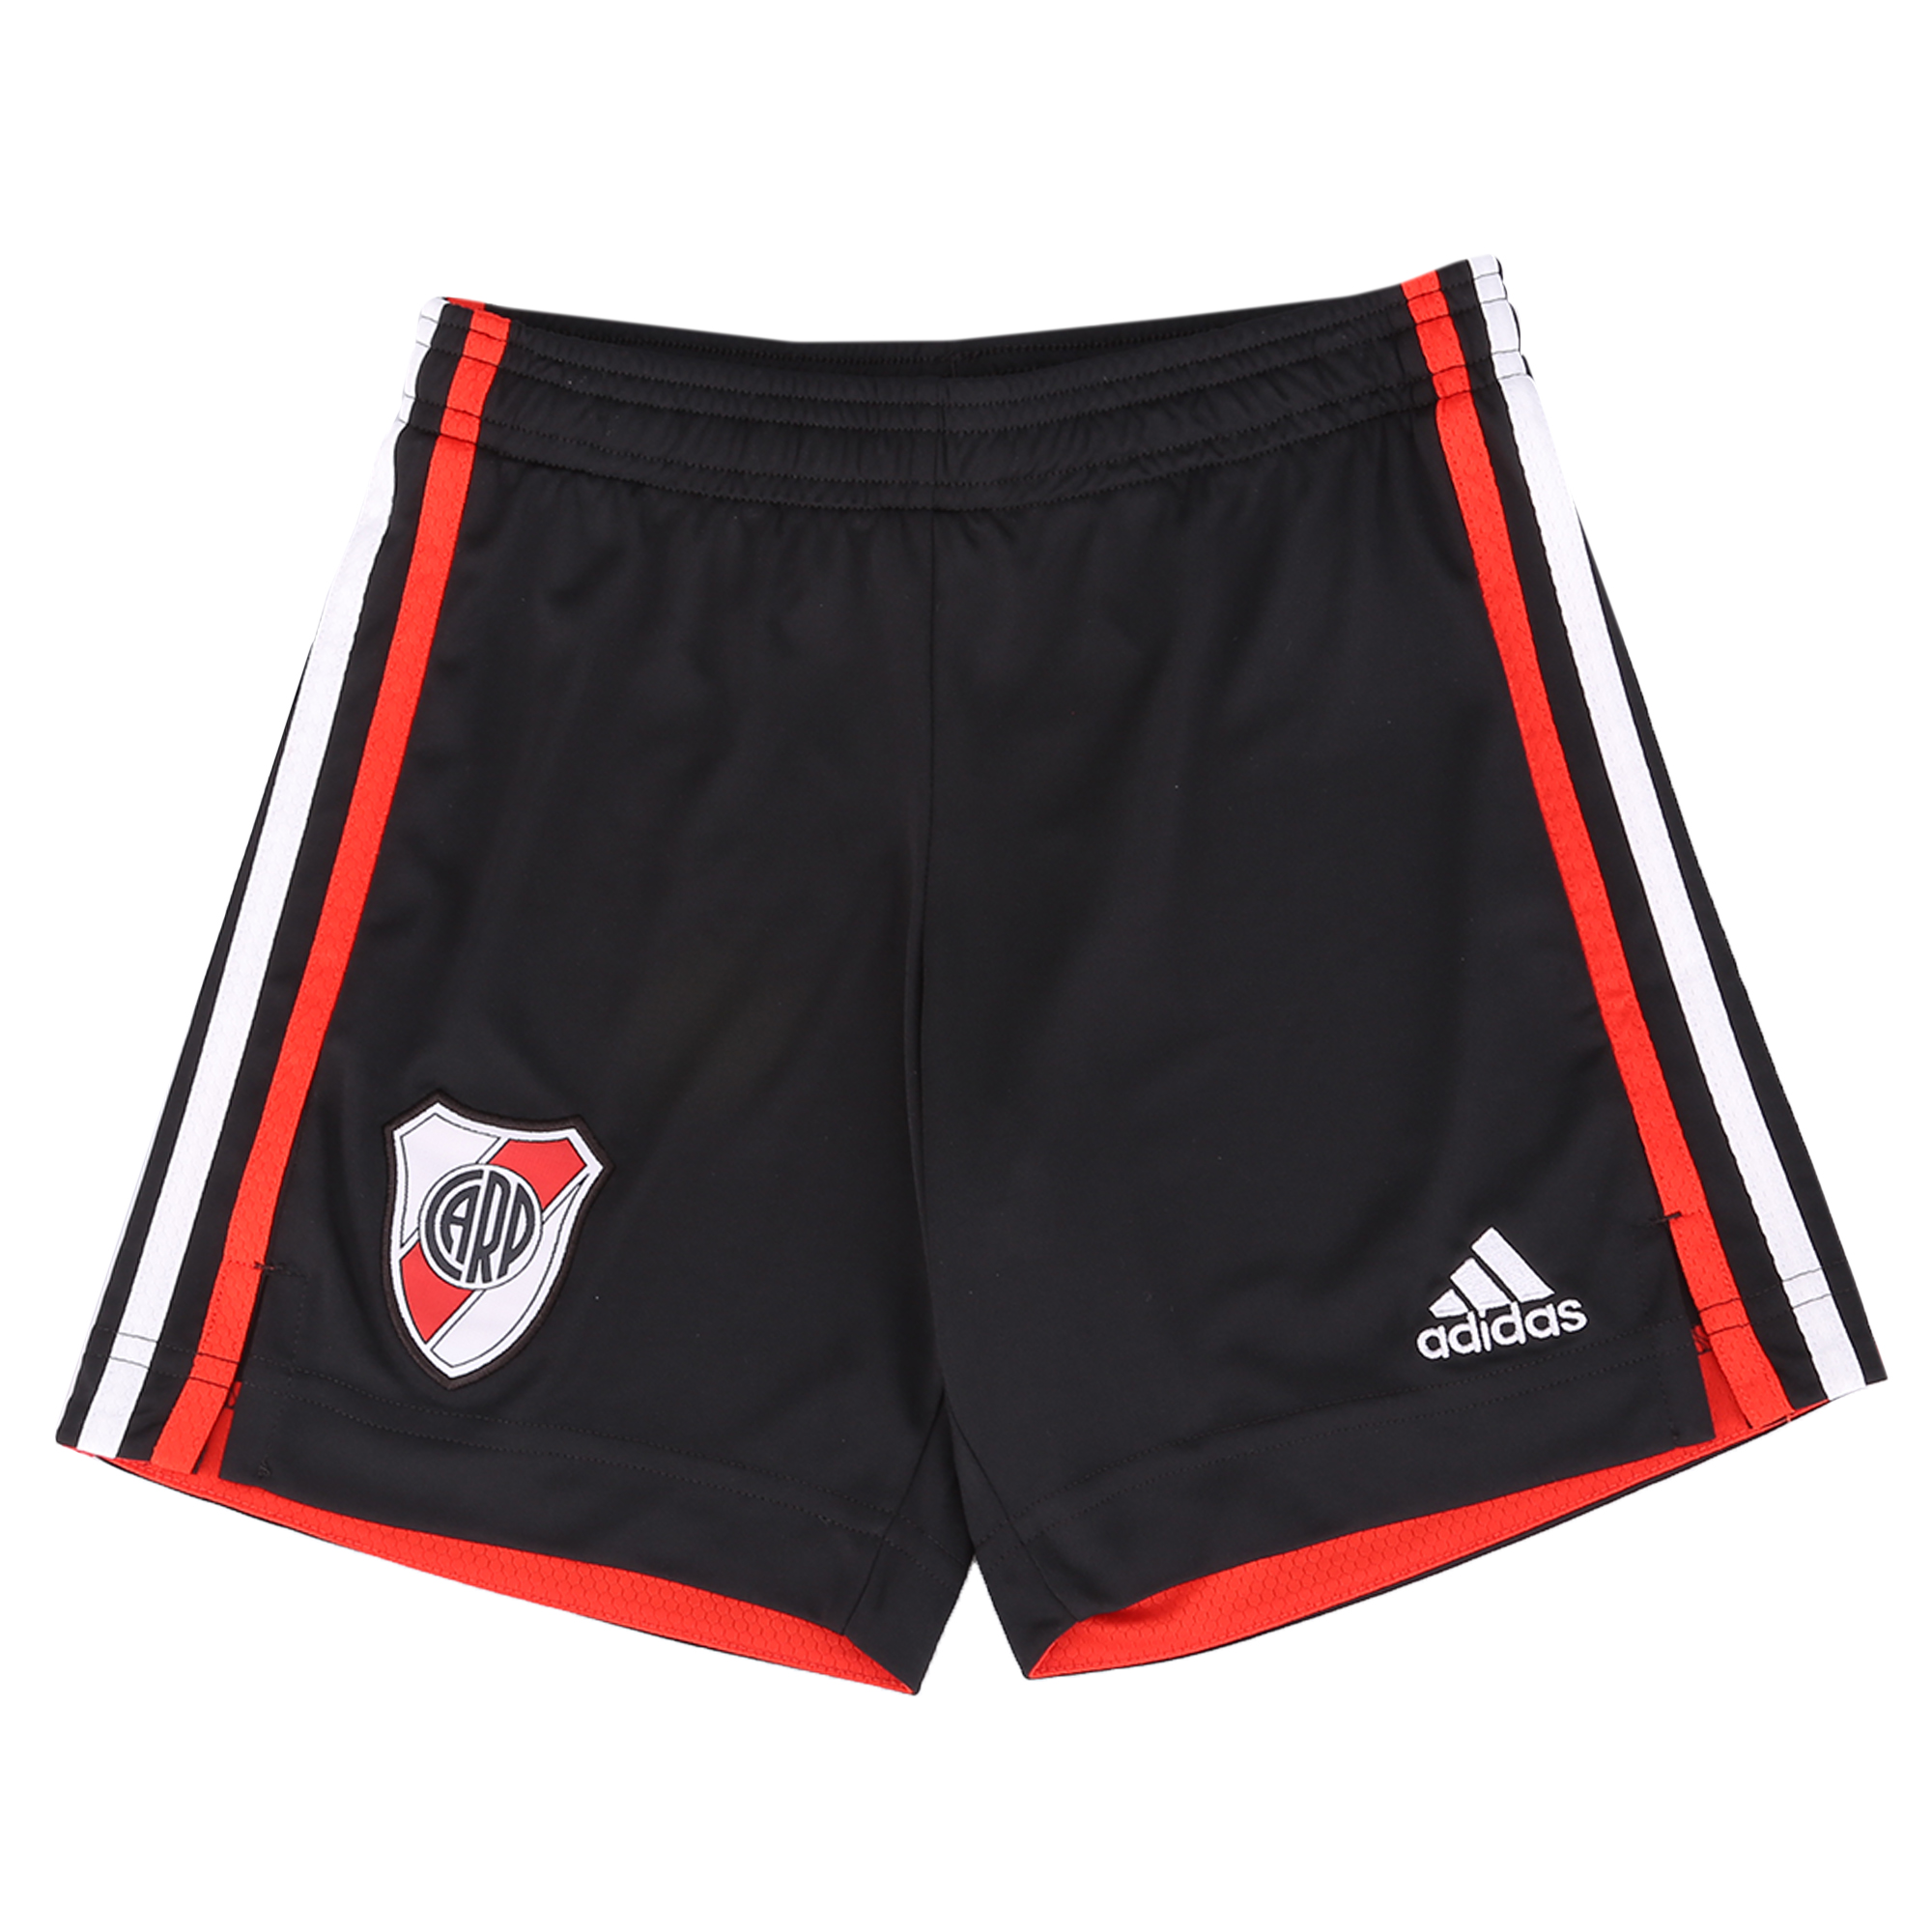 Short adidas River Plate 21/22,  image number null